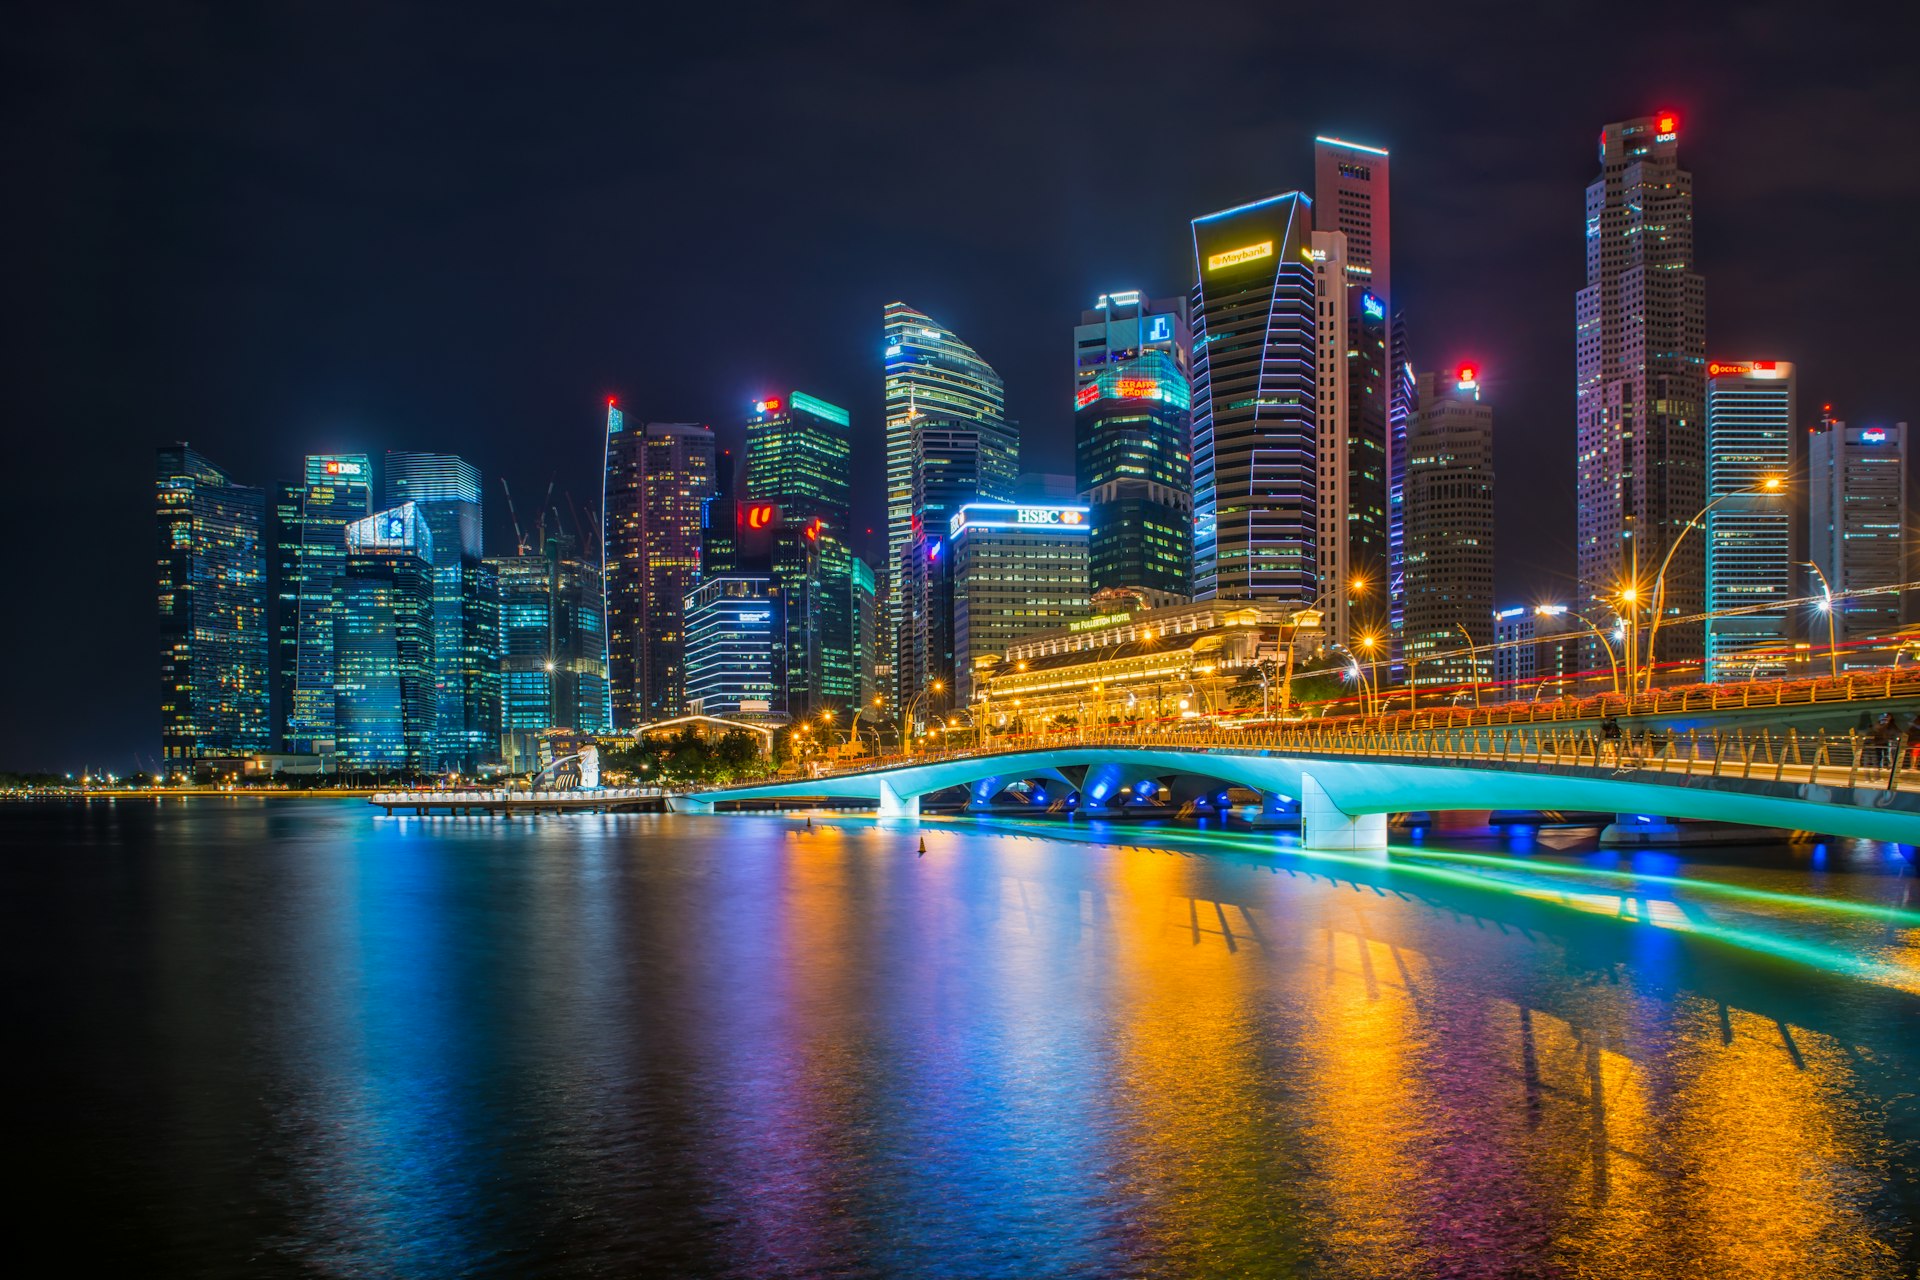 A picture of the Singapore skyline at night